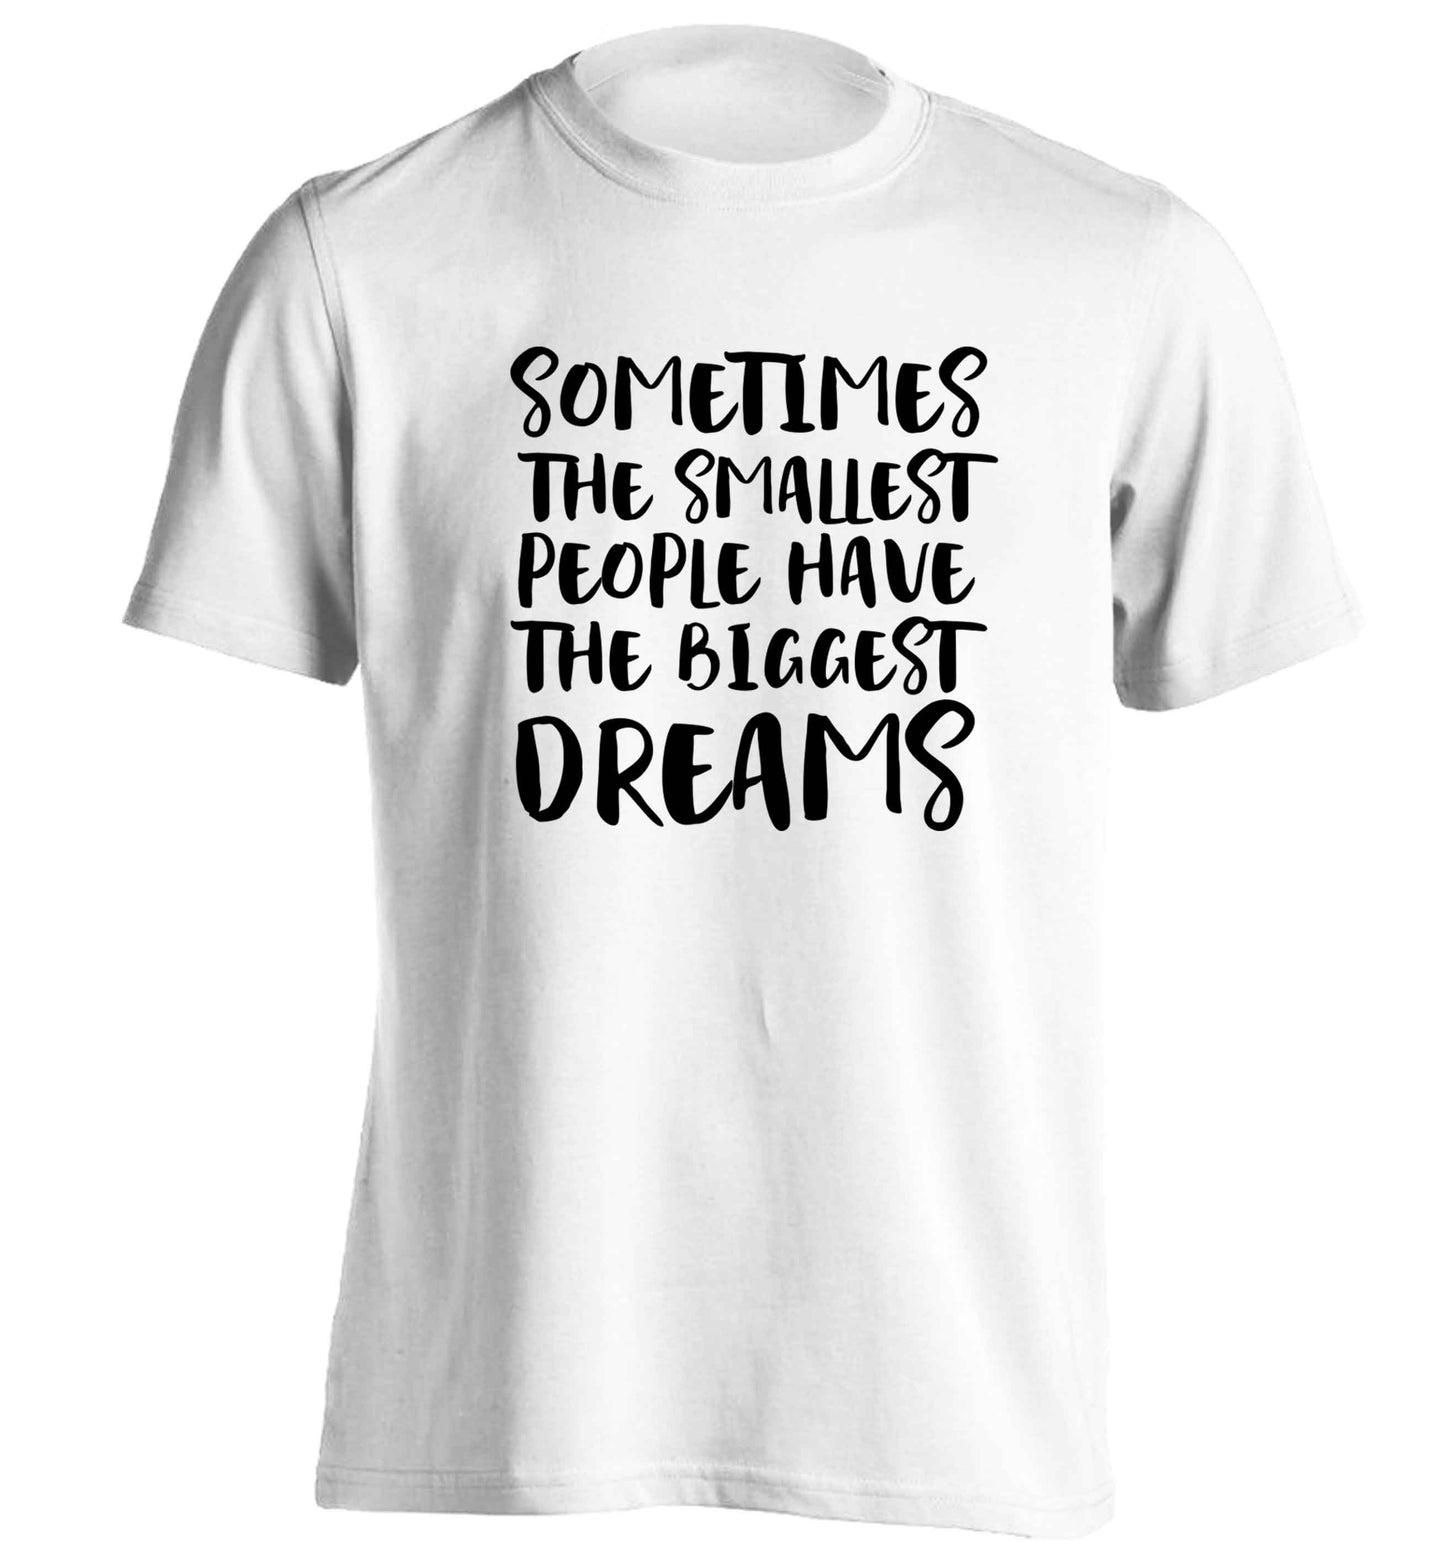 Sometimes the smallest people have the biggest dreams adults unisex white Tshirt 2XL